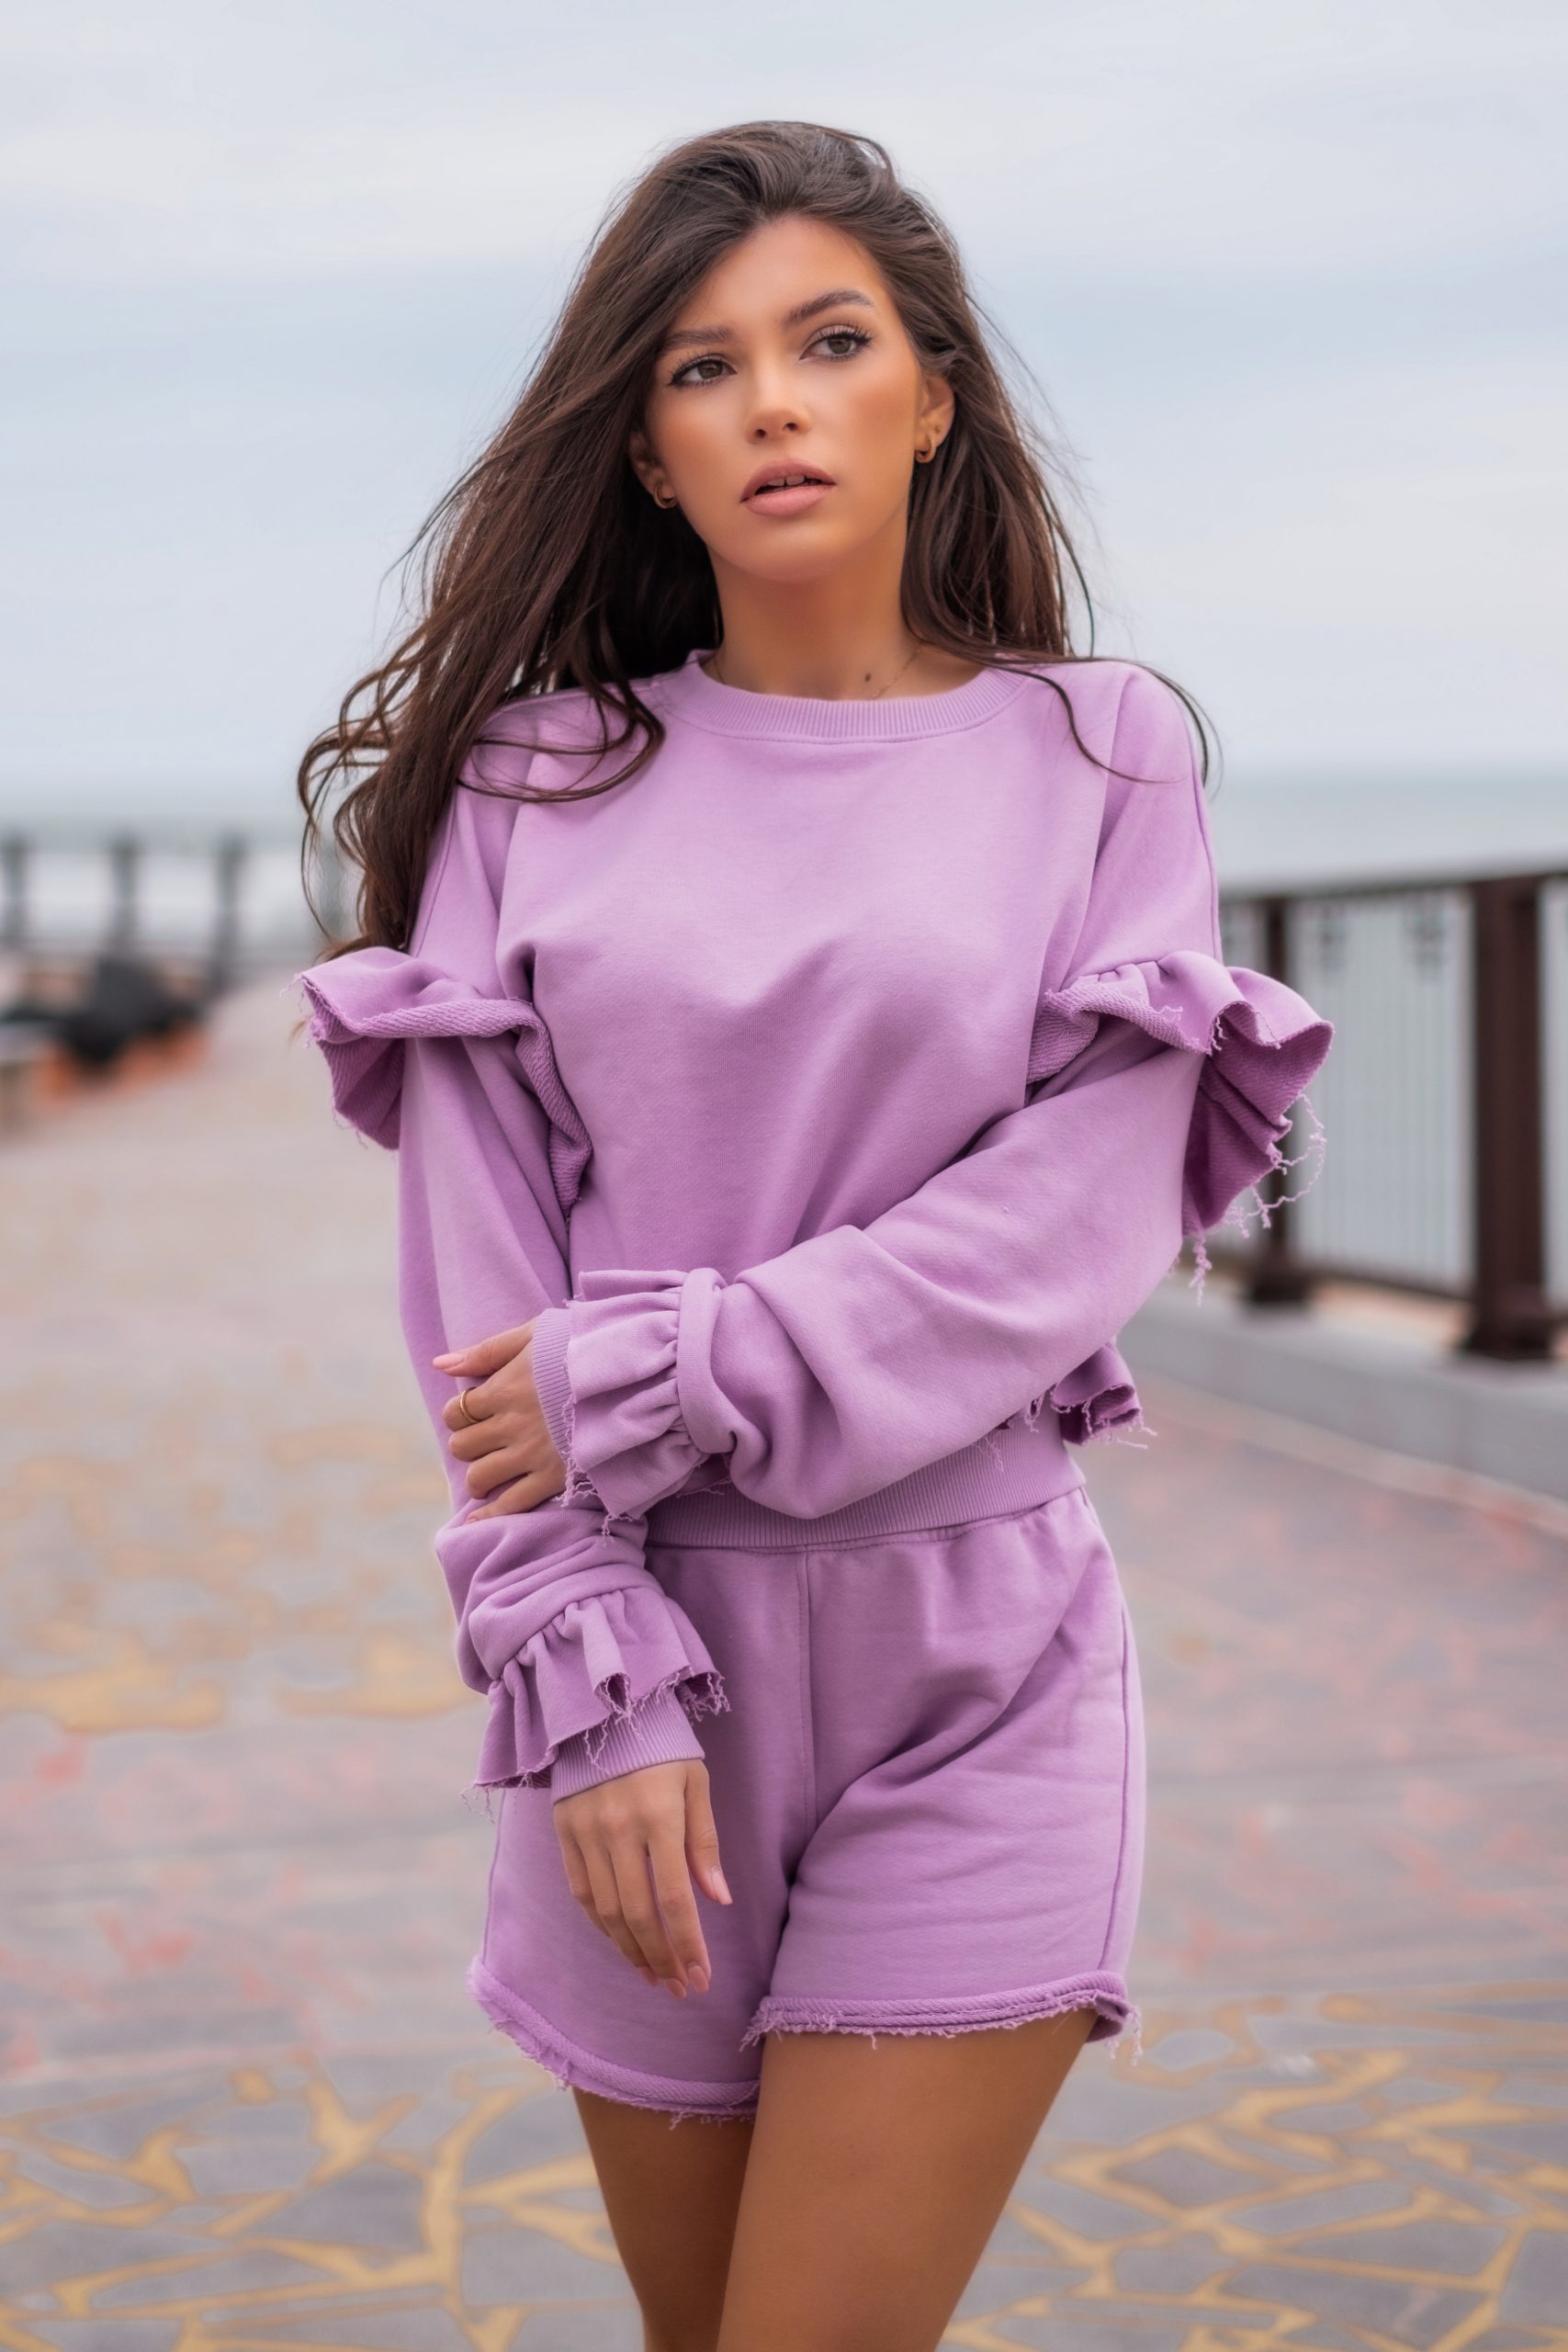 Tracksuit with shorts and ruffled top